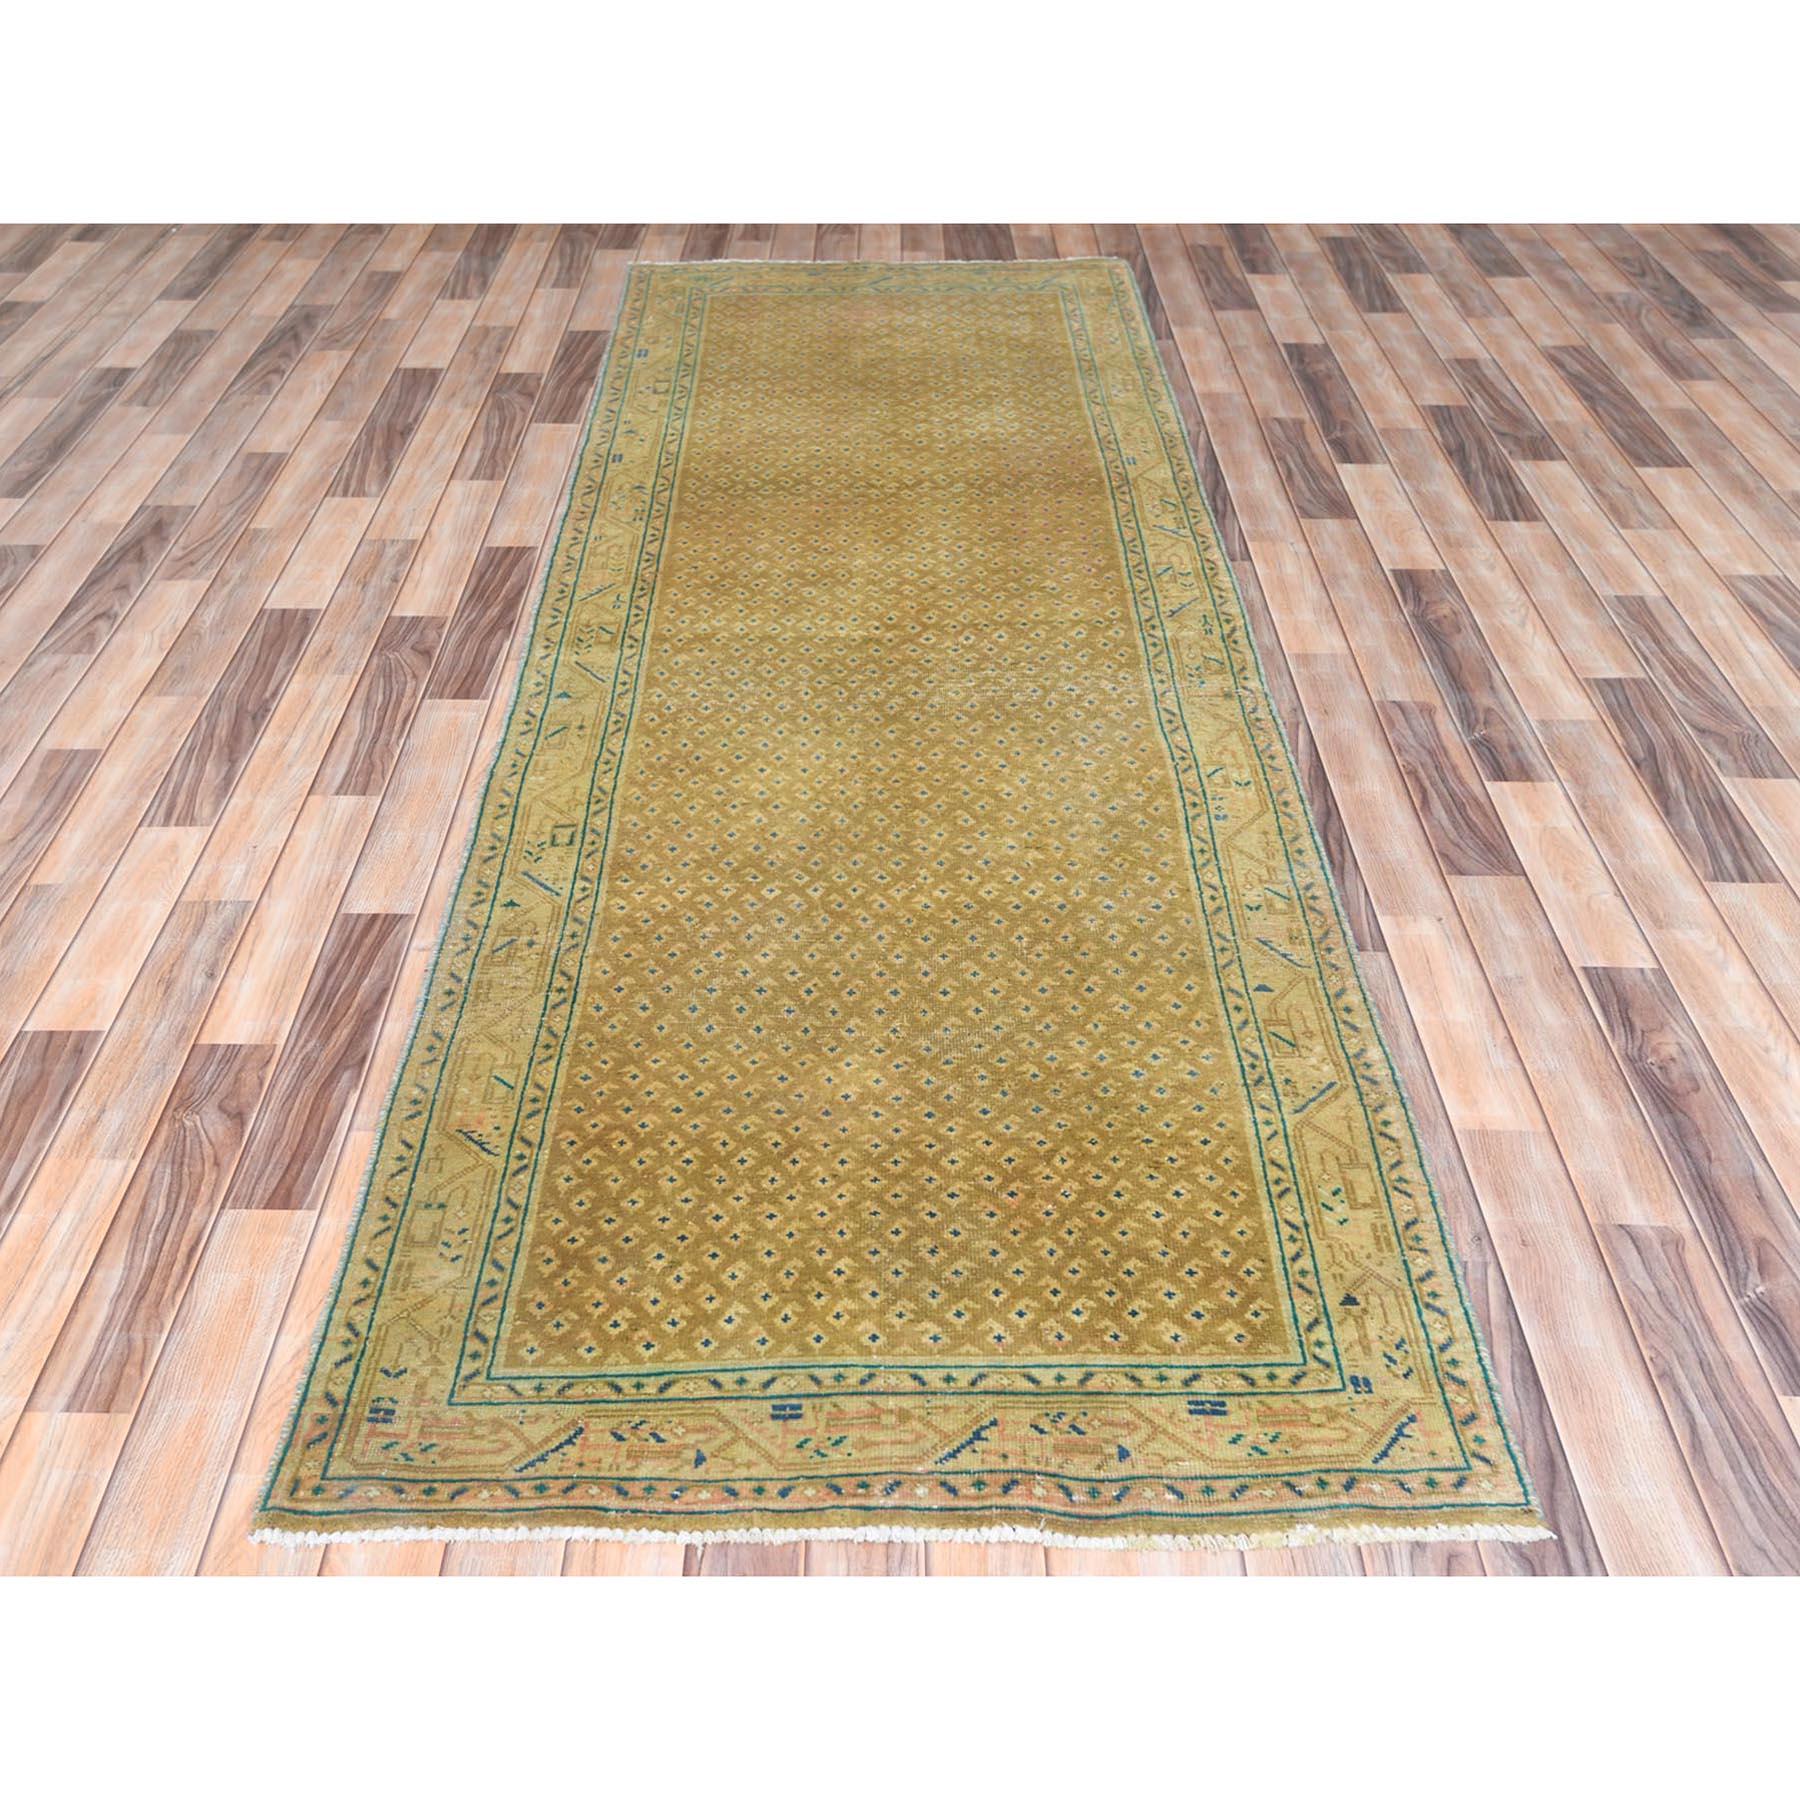 This fabulous Hand-Knotted carpet has been created and designed for extra strength and durability. This rug has been handcrafted for weeks in the traditional method that is used to make
Exact Rug Size in Feet and Inches : 3'6